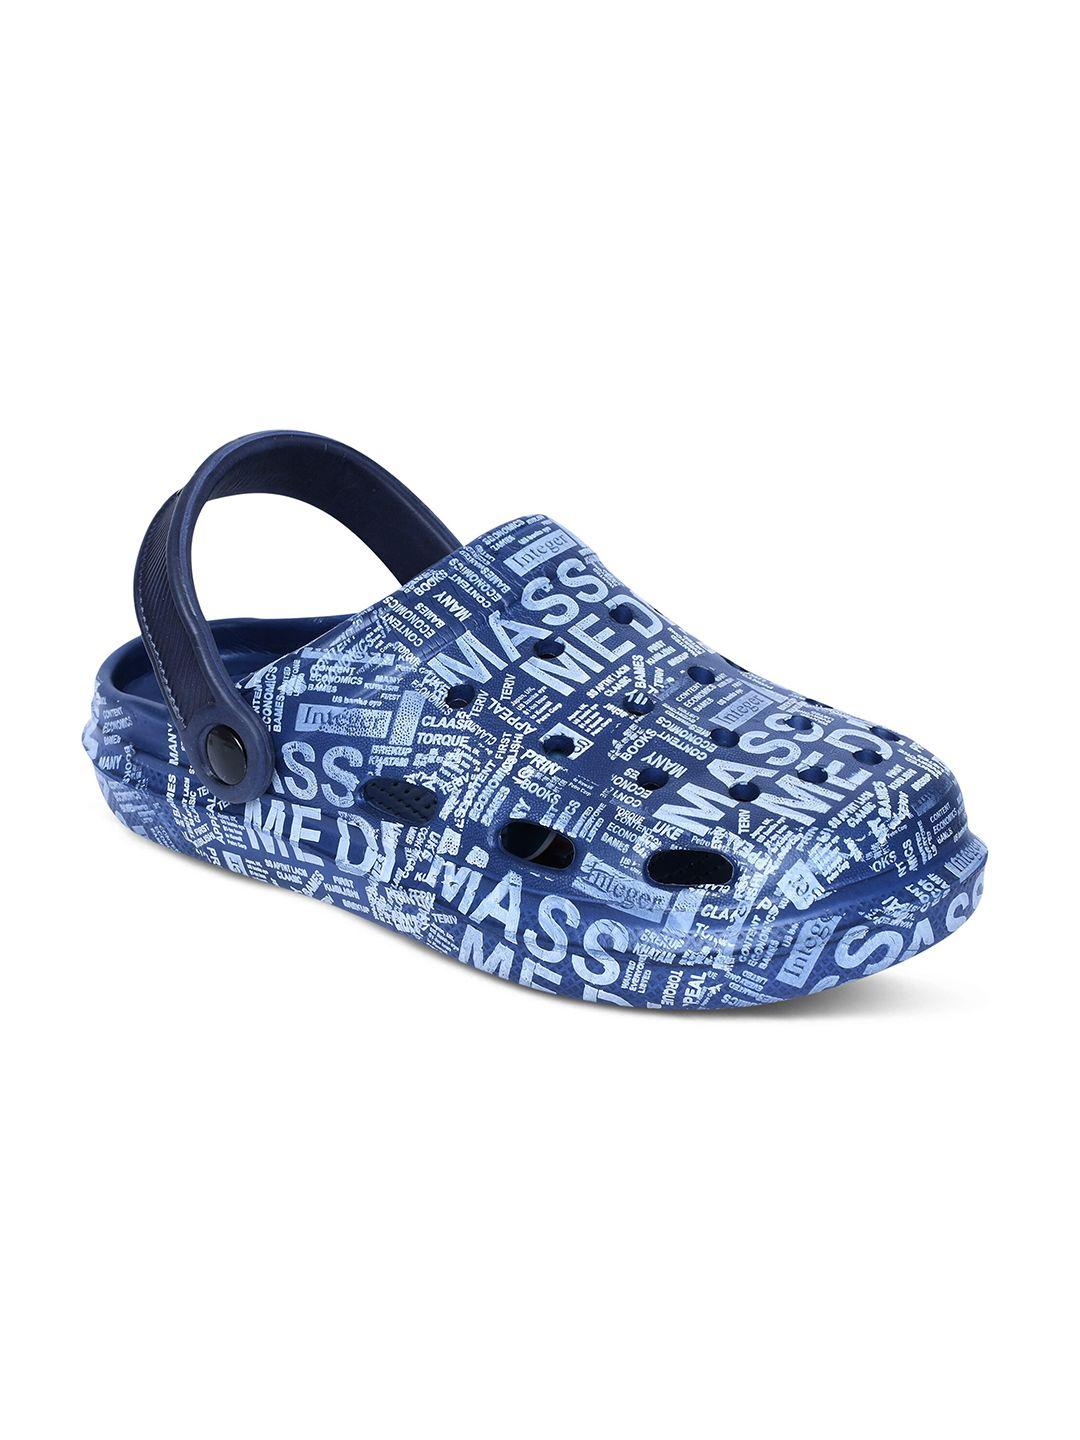 airspot-unisex-printed-clogs